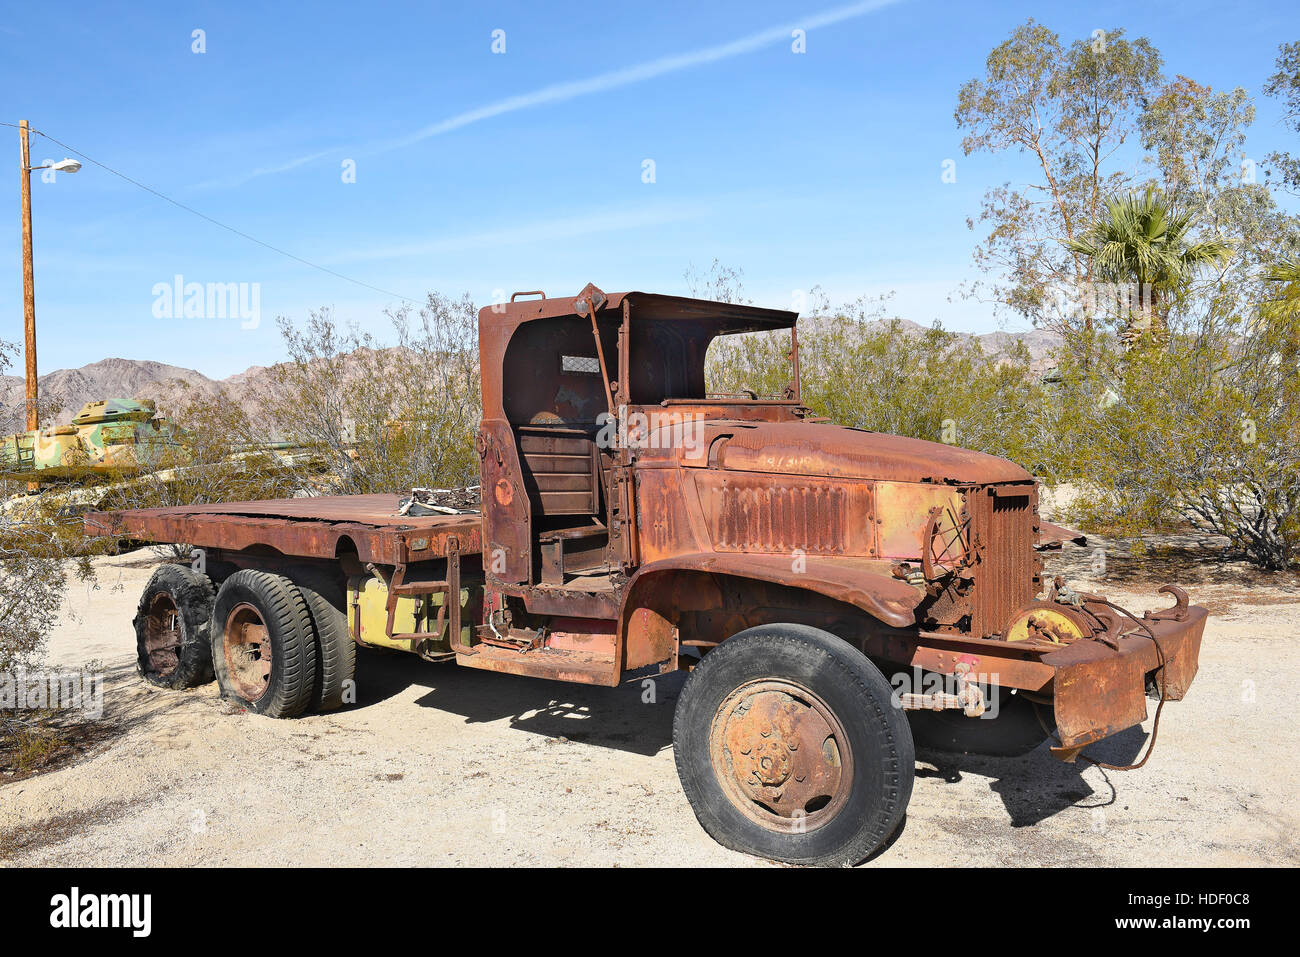 CHIRIACO SUMMIT, CA - DECEMBER 10, 2016: A Rusted military truck . The vehicle is on display at the General Patton Memorial Museum in California Stock Photo